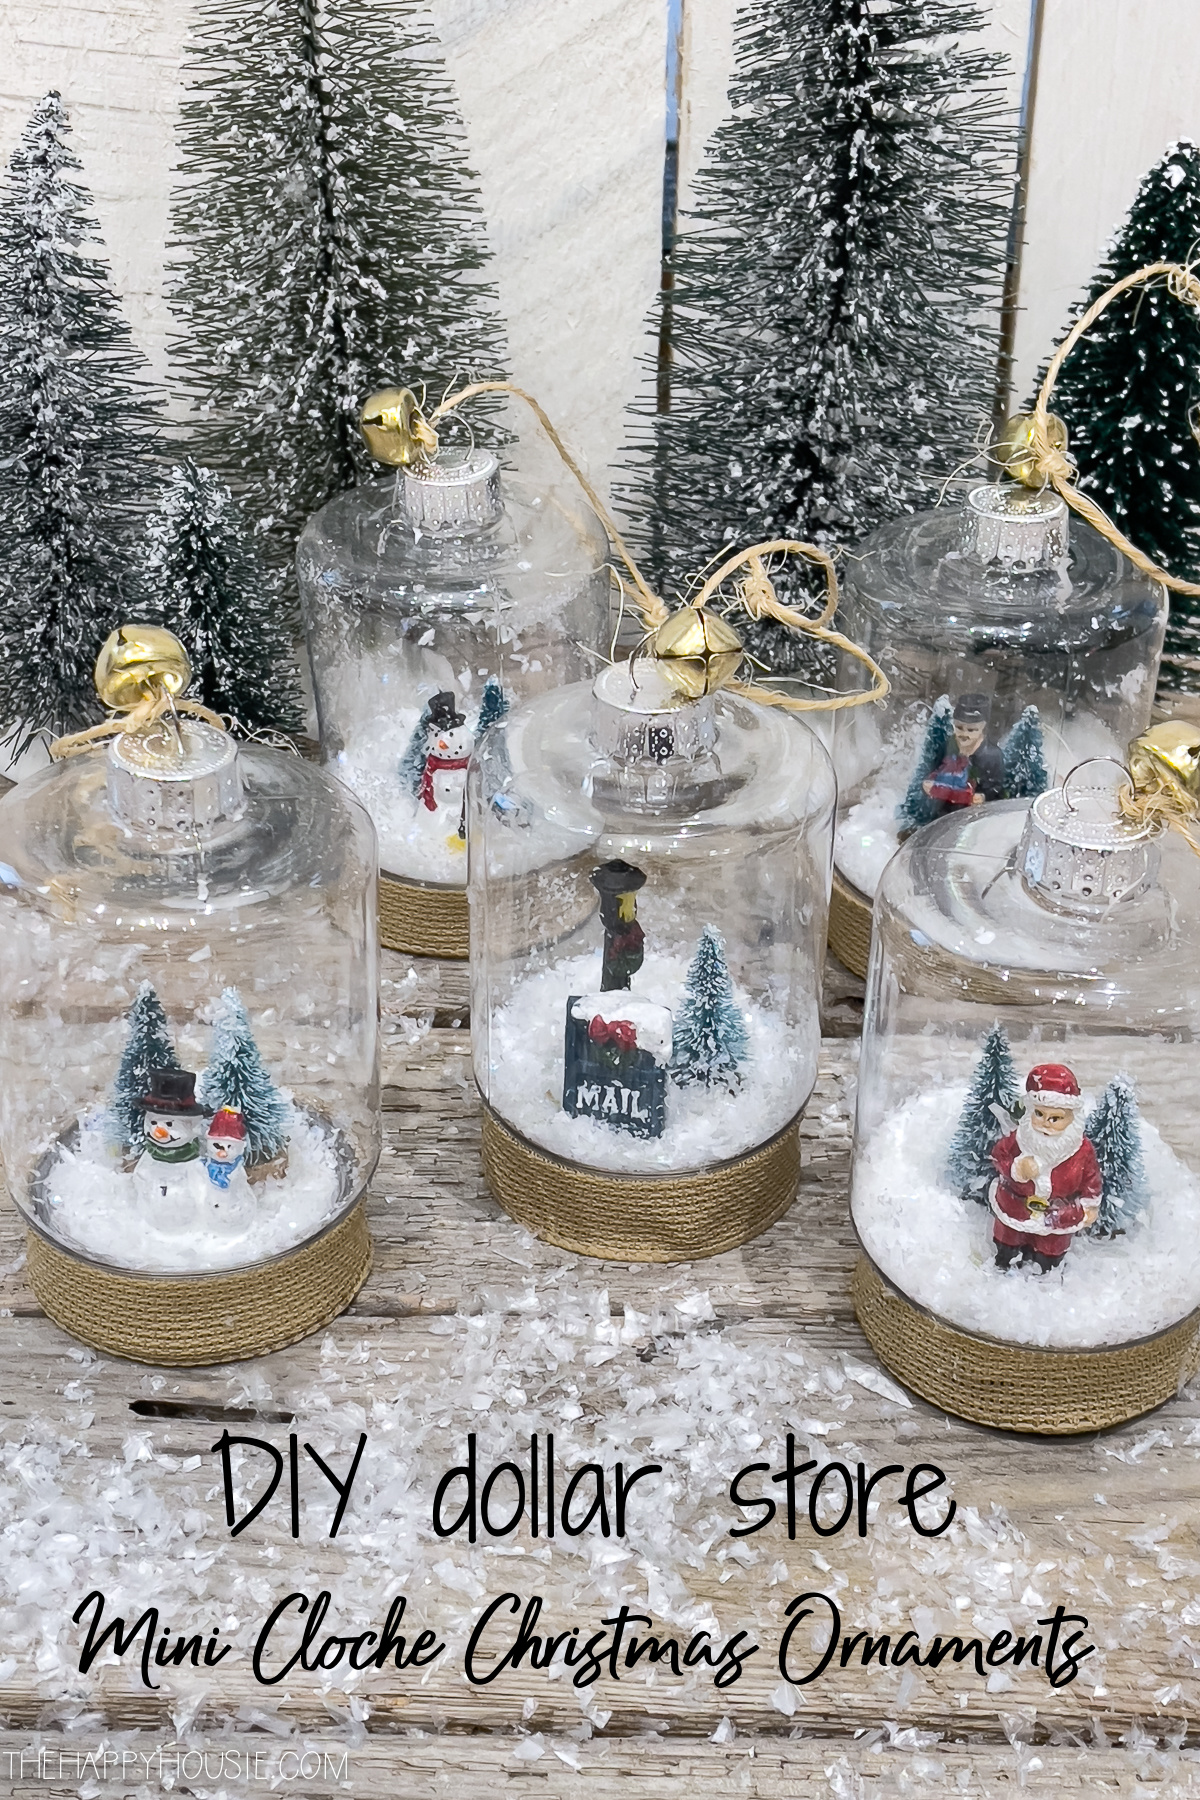 100+ dollar tree decorations christmas ideas for a budget-friendly holiday